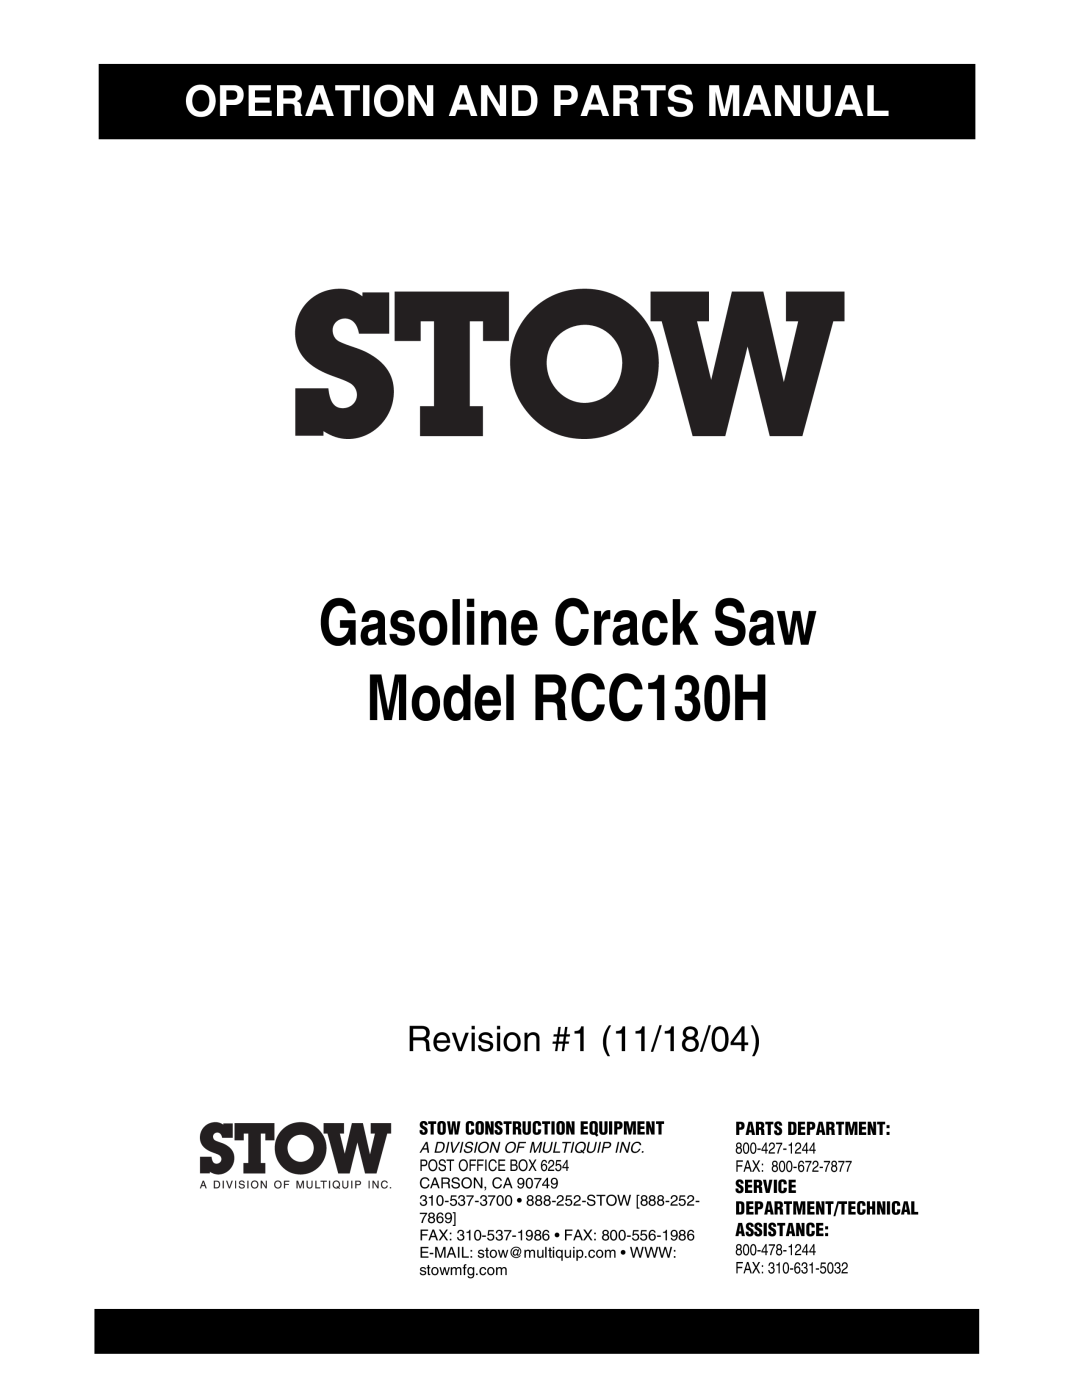 Stow manual Operation And Parts Manual, Gasoline Crack Saw Model RCC130H, Revision #1 11/18/04, Parts Department, 7869 